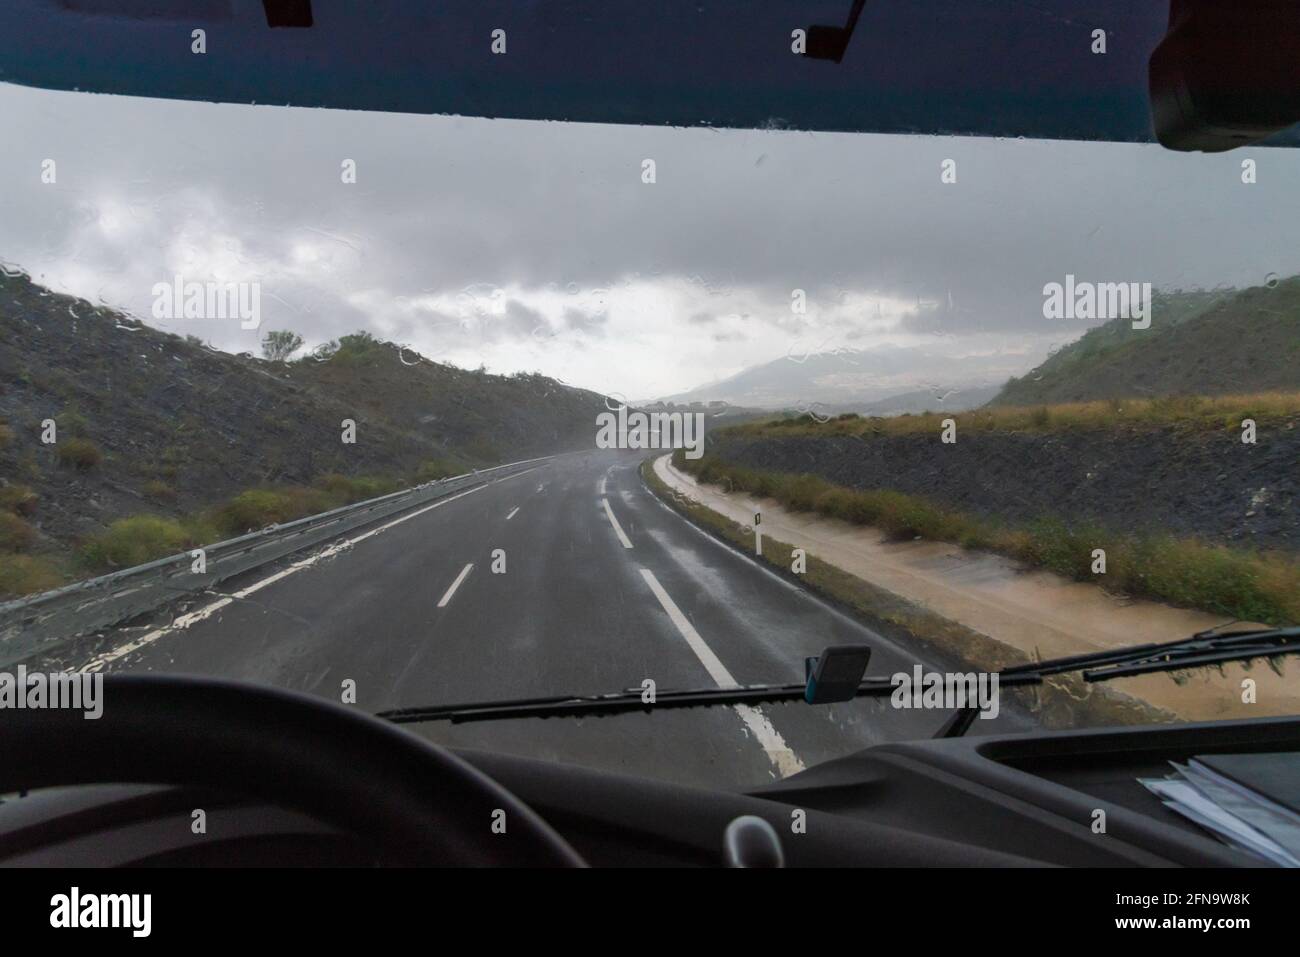 View of the highway from the driver's seat of a truck on a heavy rainy day. Stock Photo